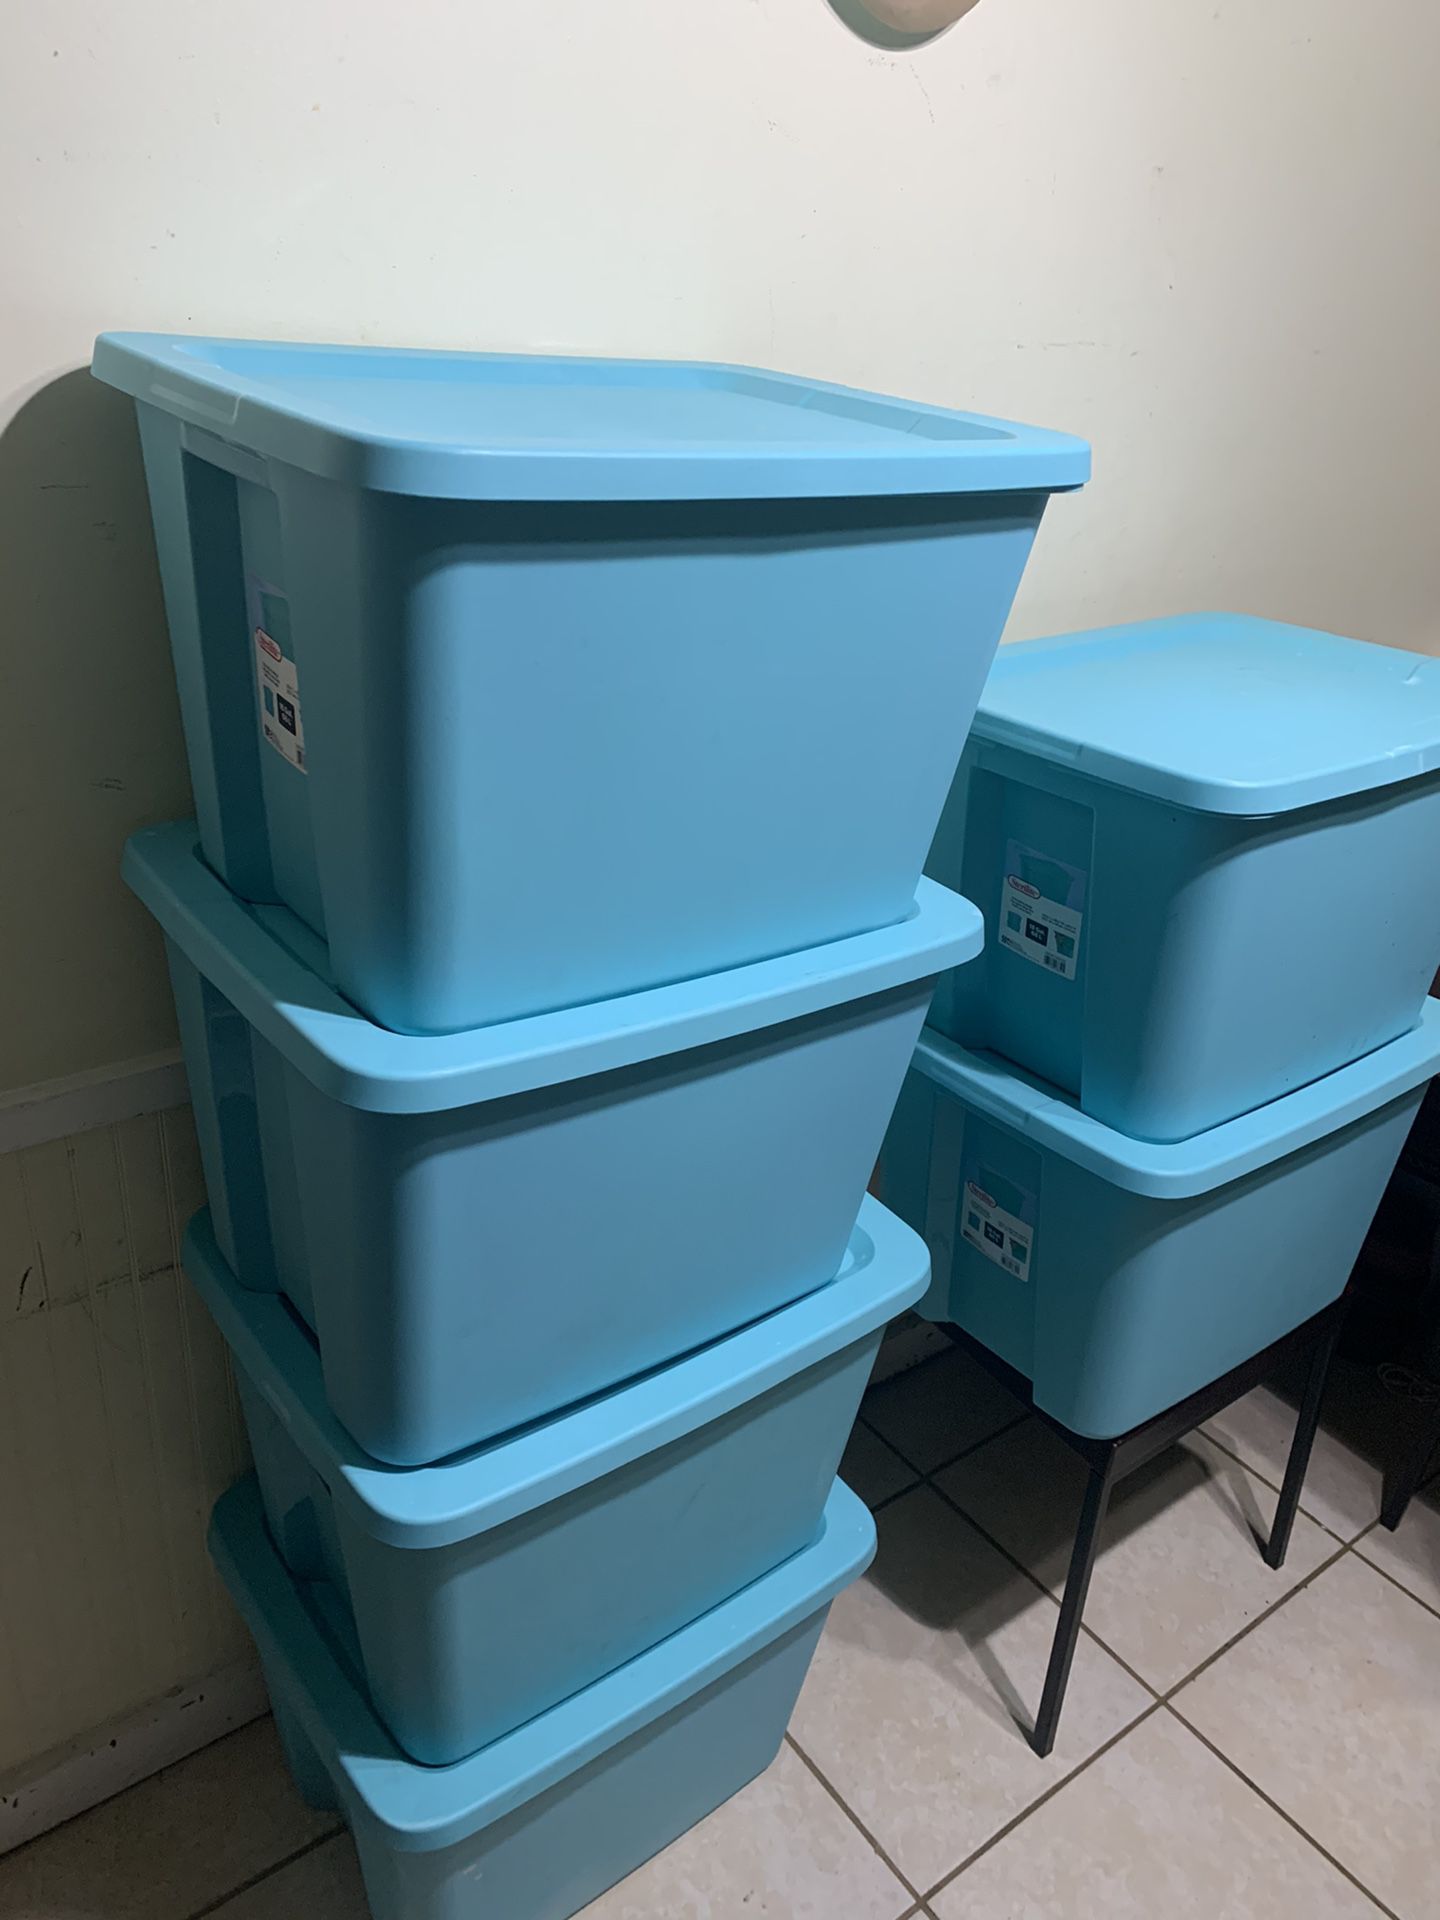 6 Storage Bins.  (Each is 68 Liter Capacity). All Good,  Used ONE time for moving stuff. $10 Each